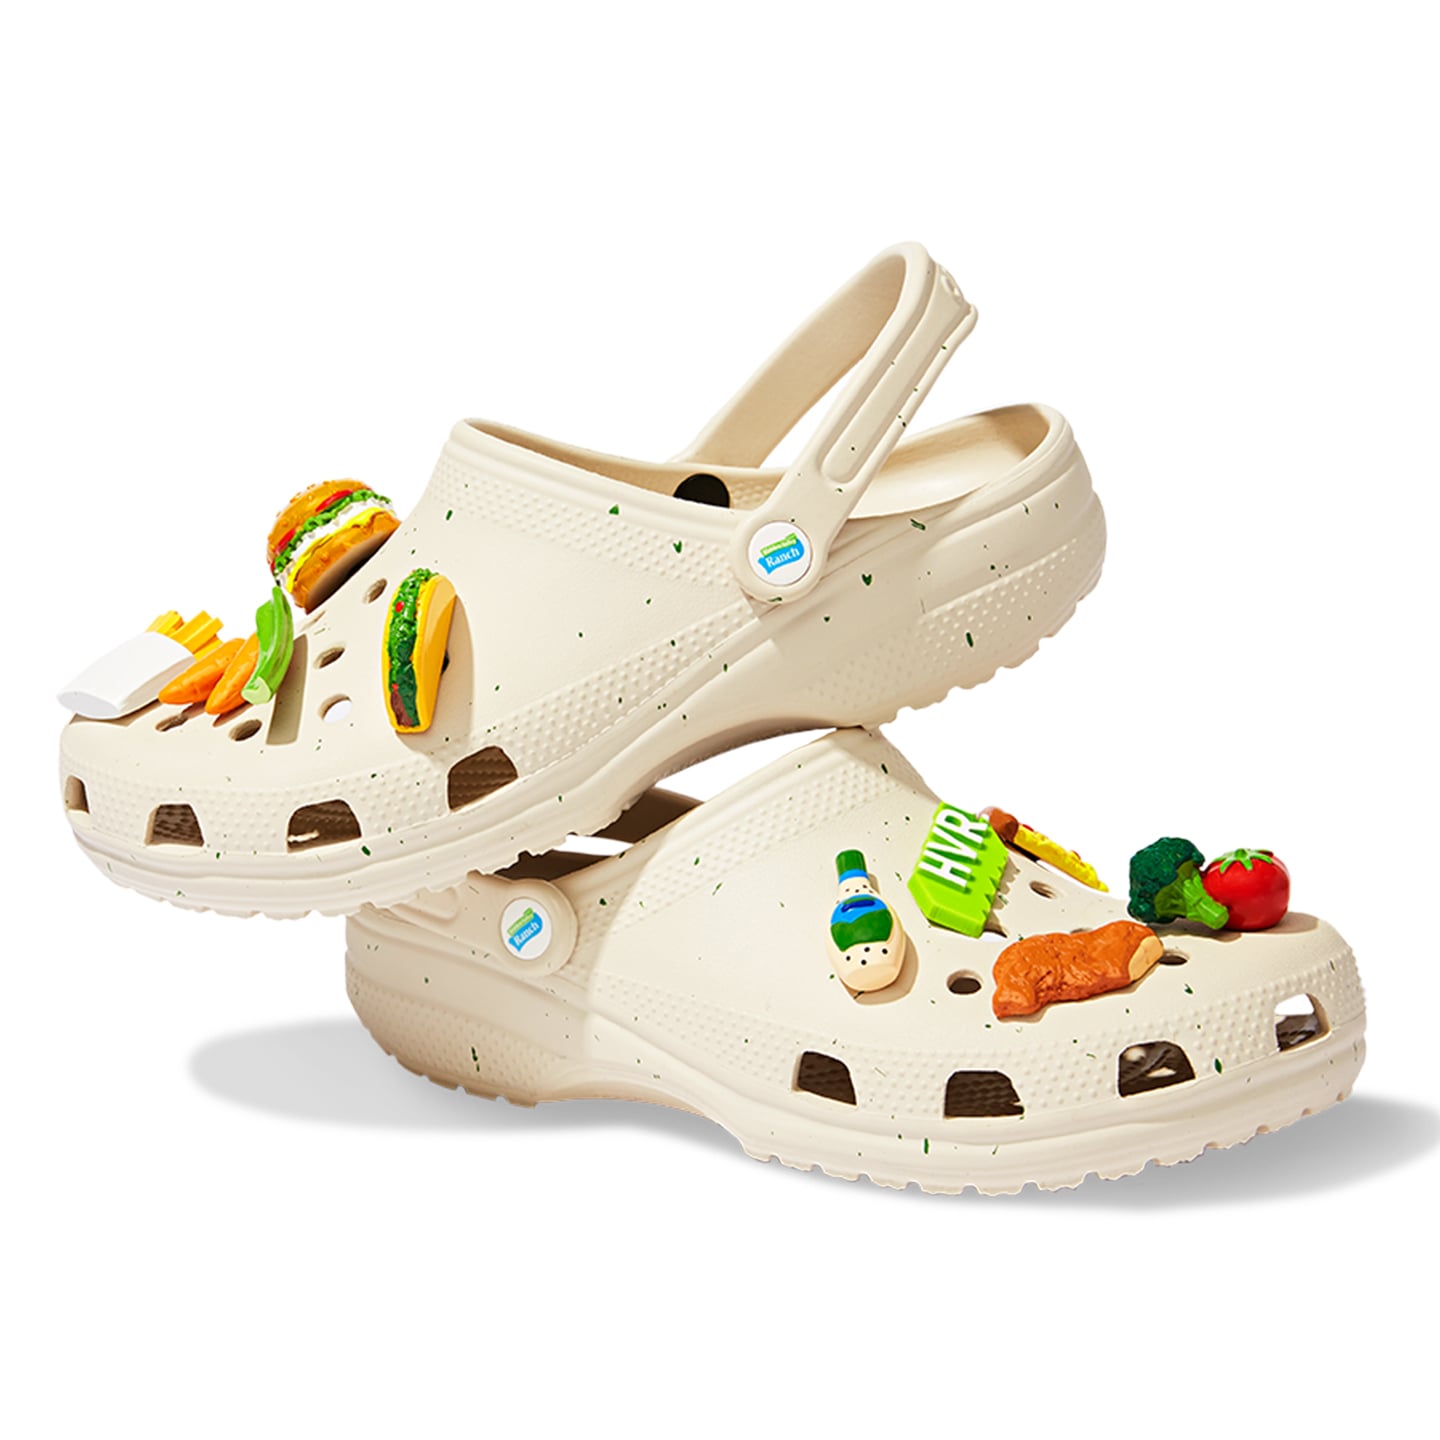 Hidden Valley Ranch x Crocs Shoes Are Available to Purchase | POPSUGAR Food